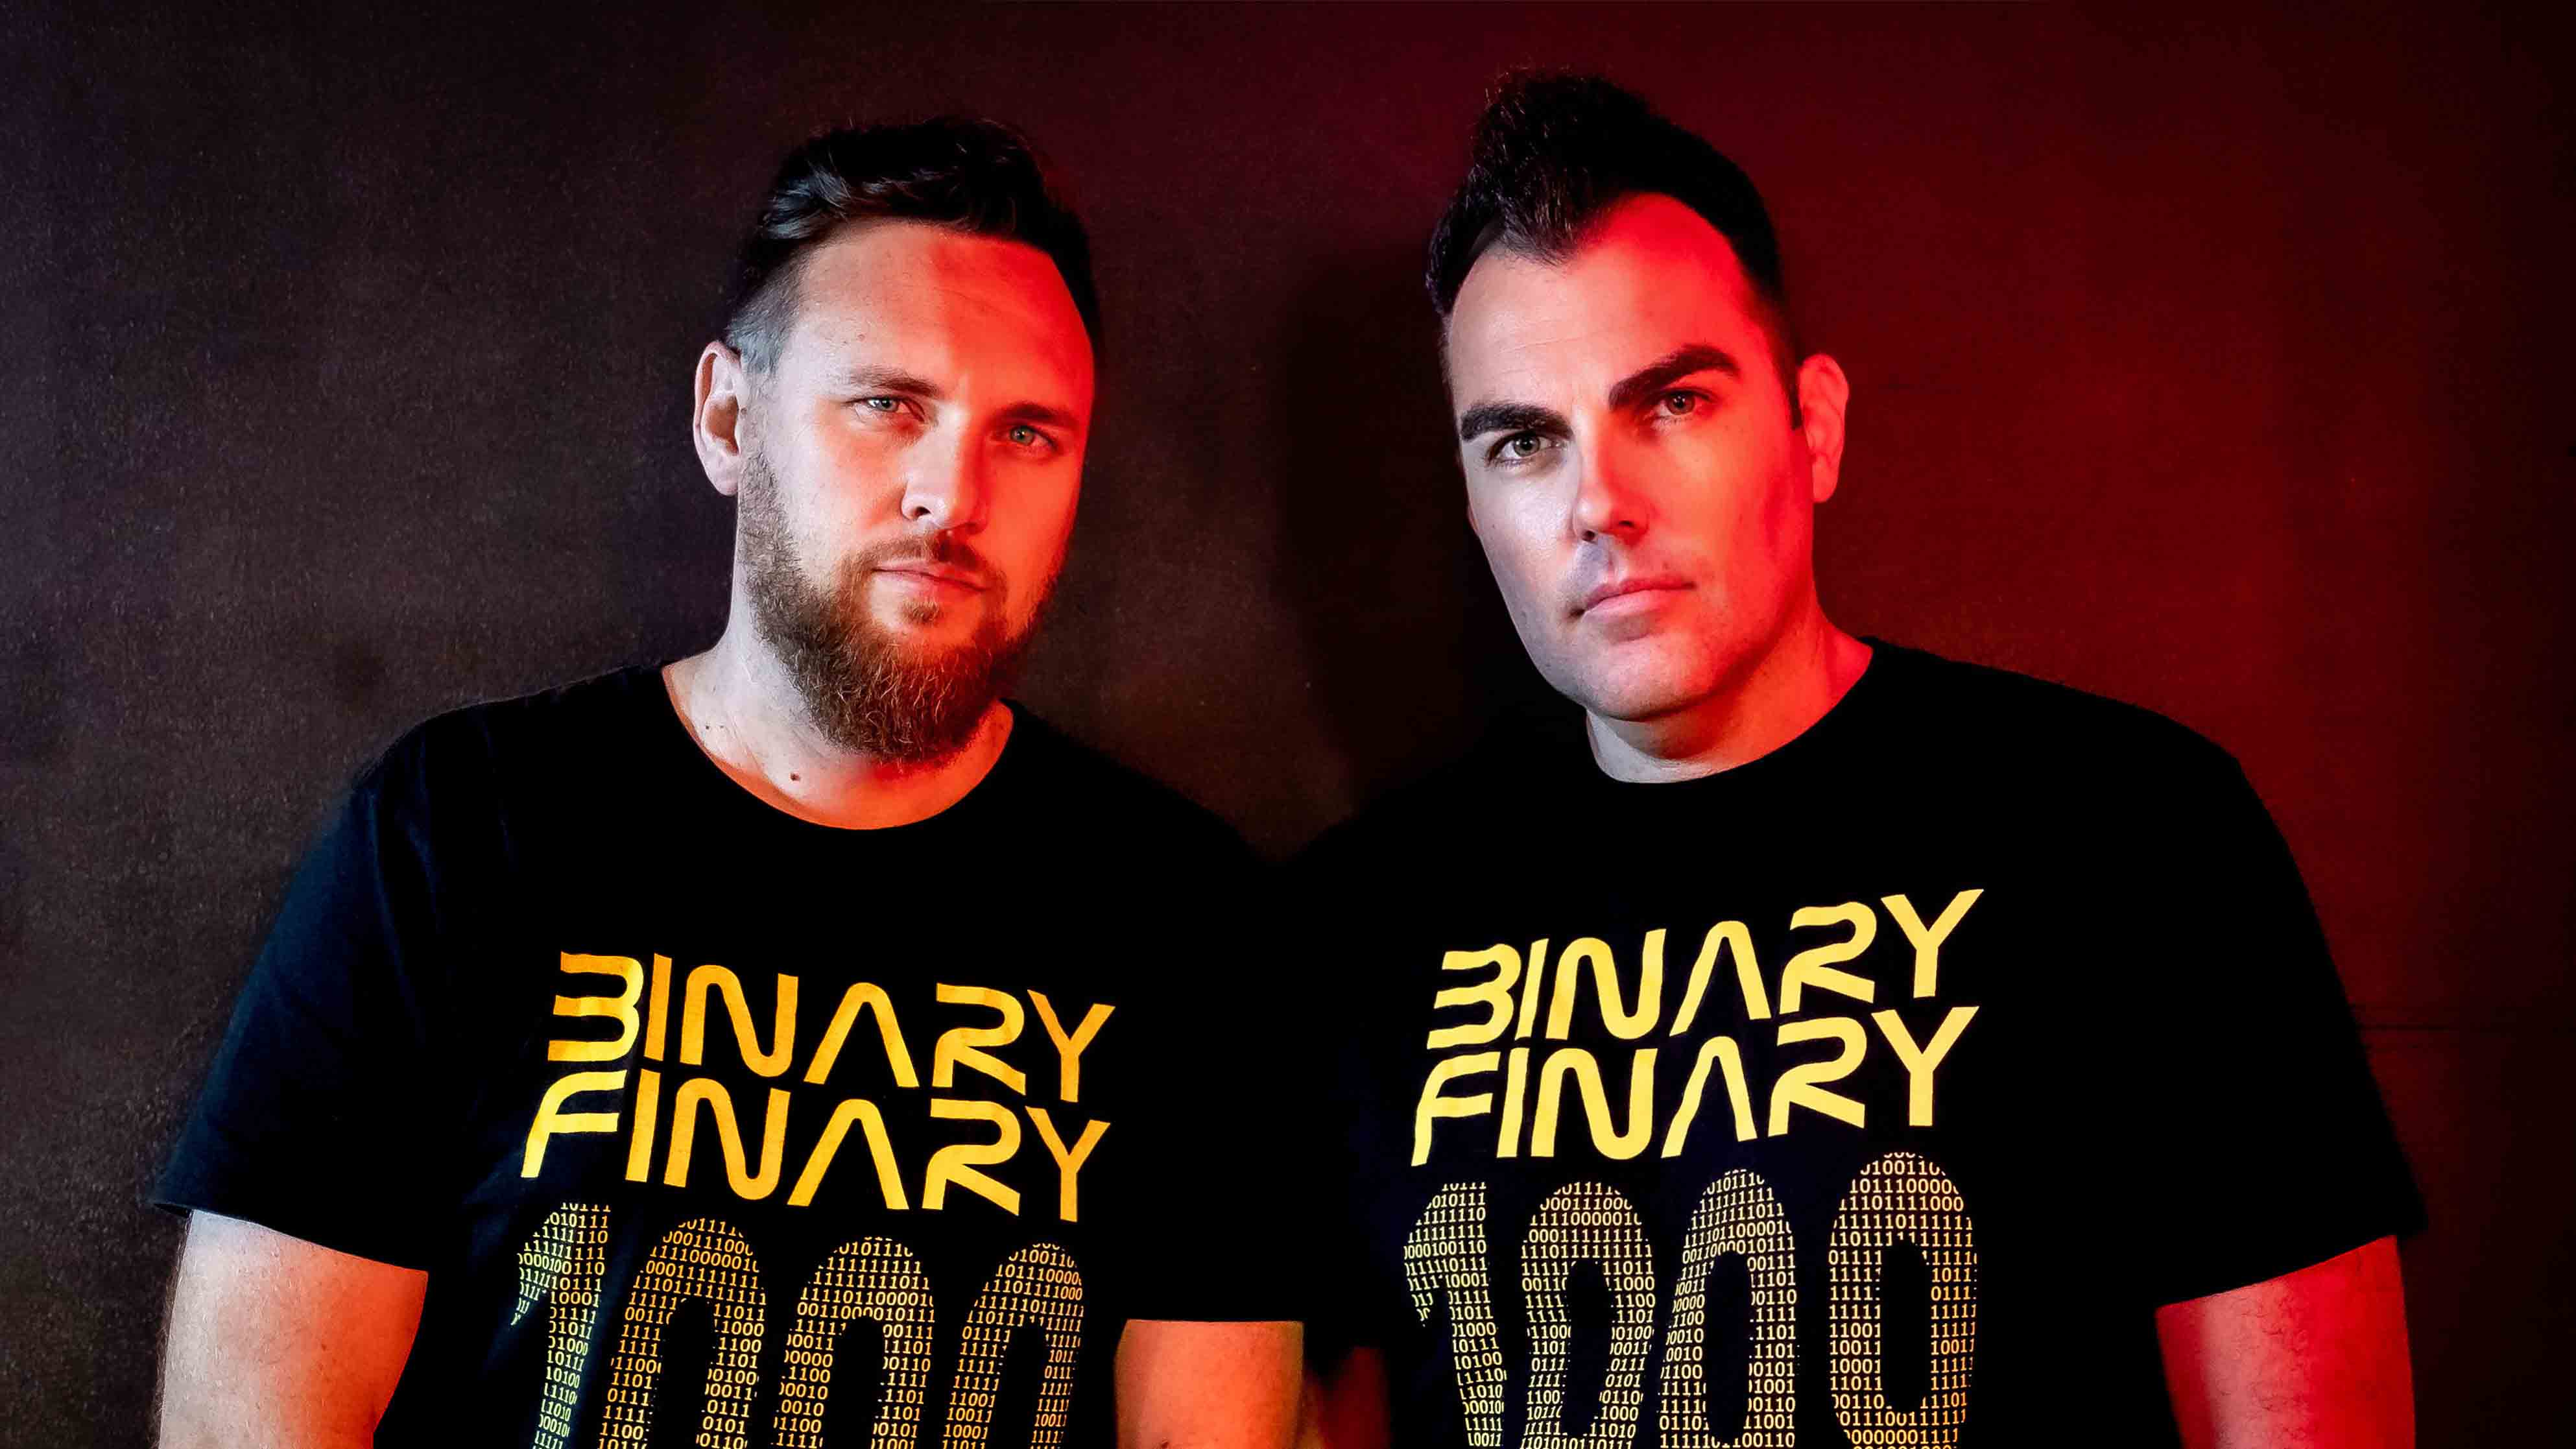 Binary Finary have teamed up with the Classic Trance community to press a very special vinyl ‘Timeless Vol 1’: Interview